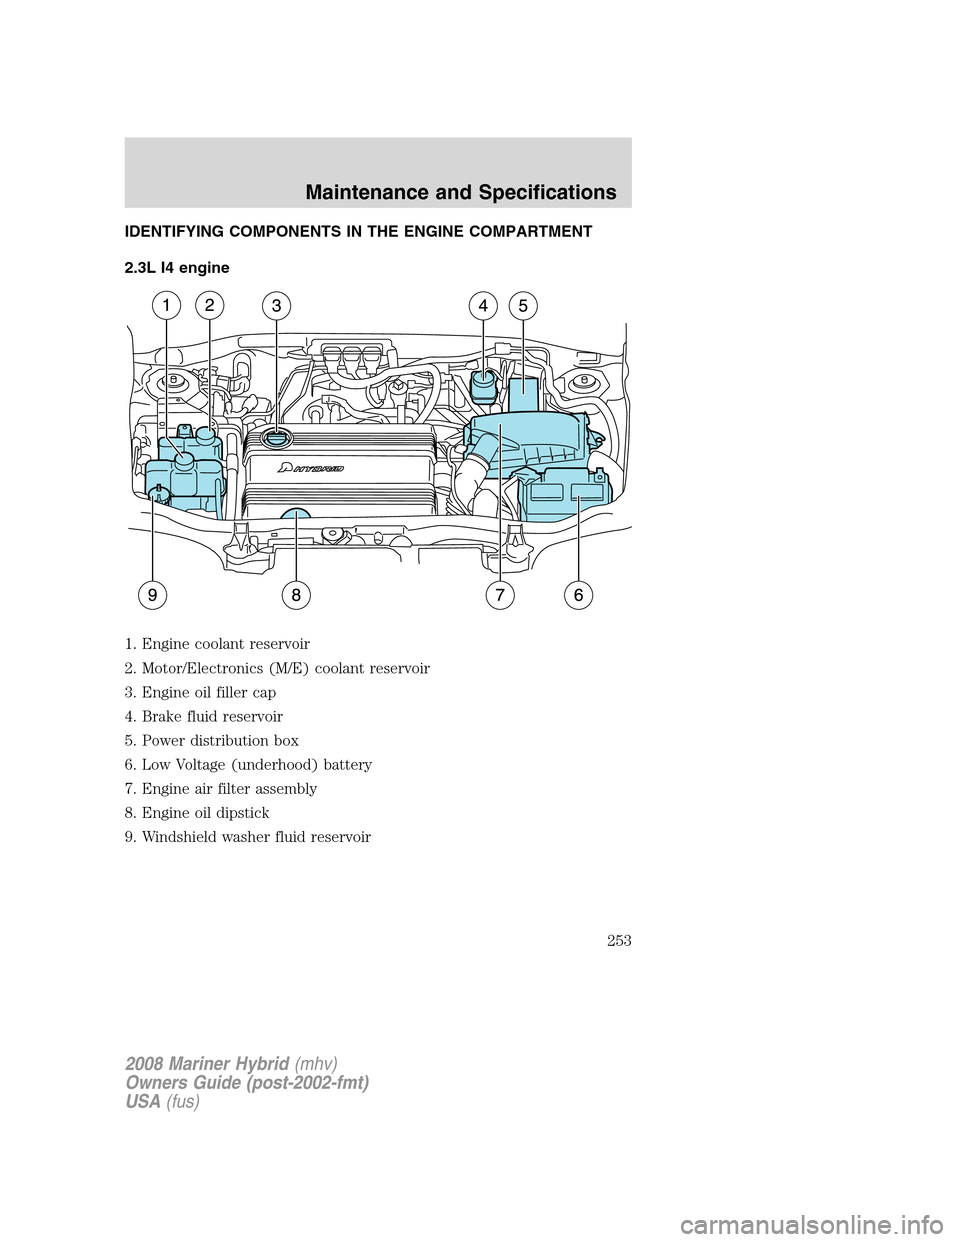 Mercury Mariner Hybrid 2008  Owners Manuals IDENTIFYING COMPONENTS IN THE ENGINE COMPARTMENT
2.3L I4 engine
1. Engine coolant reservoir
2. Motor/Electronics (M/E) coolant reservoir
3. Engine oil filler cap
4. Brake fluid reservoir
5. Power dist